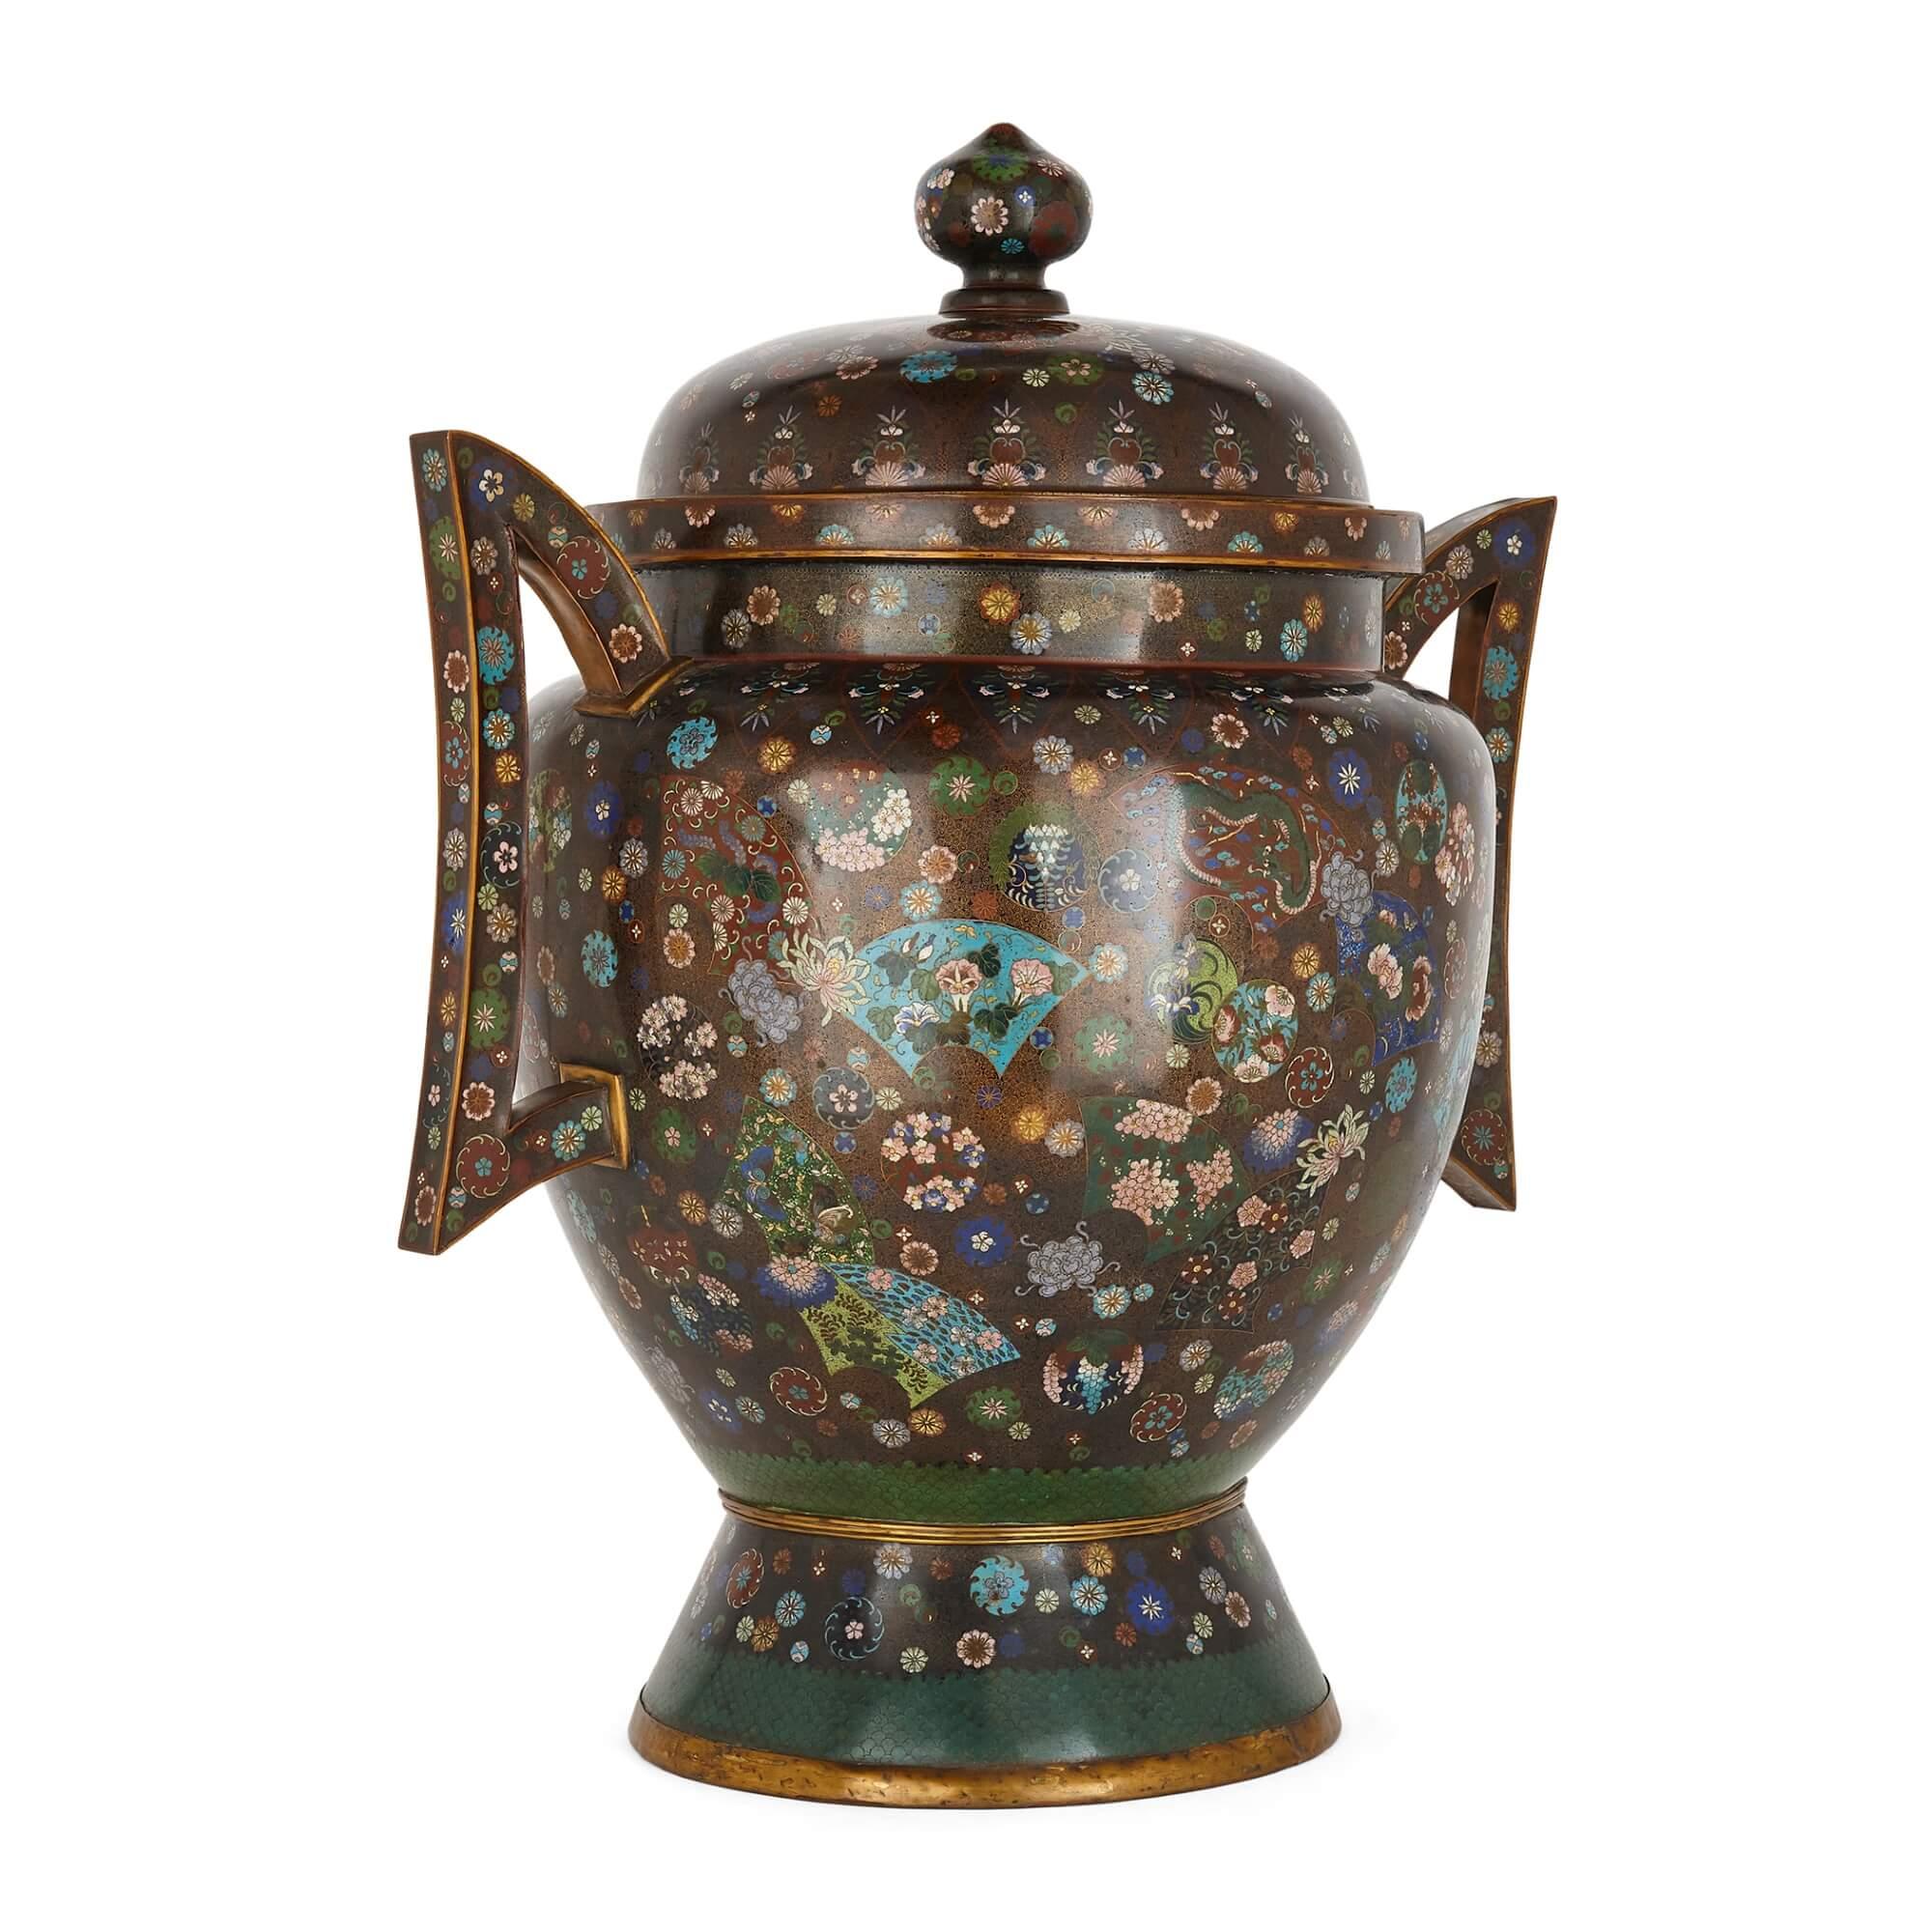 Large Meiji Period Cloisonne Enamel Koro
Japanese, late 19th Century
Height 88cm, width 76cm, depth 53cm

This superb cloisonne enamel koro was made during Japan's Meiji period, and is exemplary of the quality of the decorative arts during this